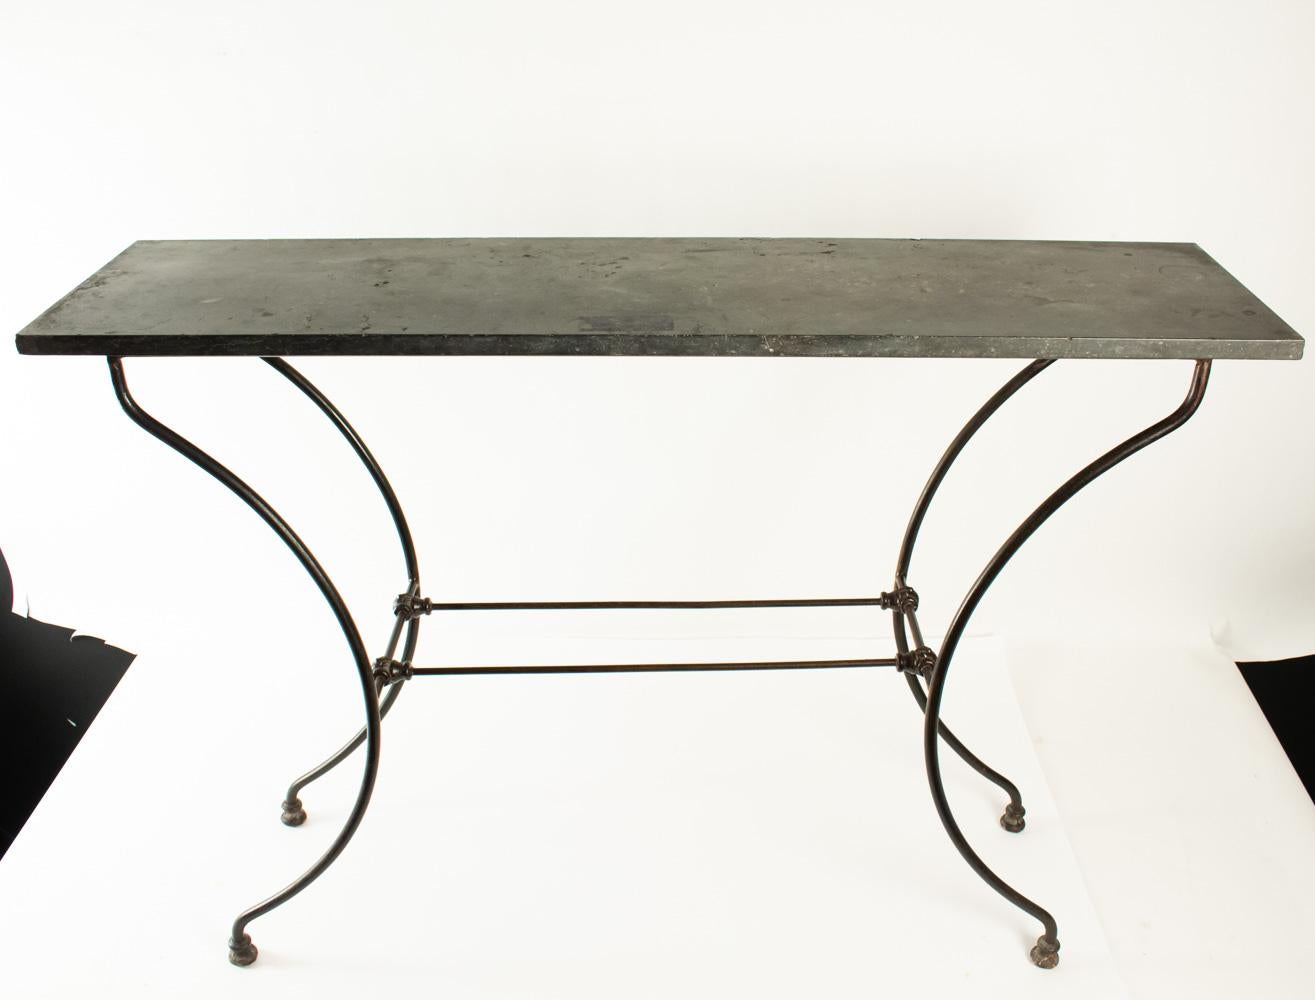 Wrought Iron Console with Marble Top, 19th Century, Period Napoleon III 2